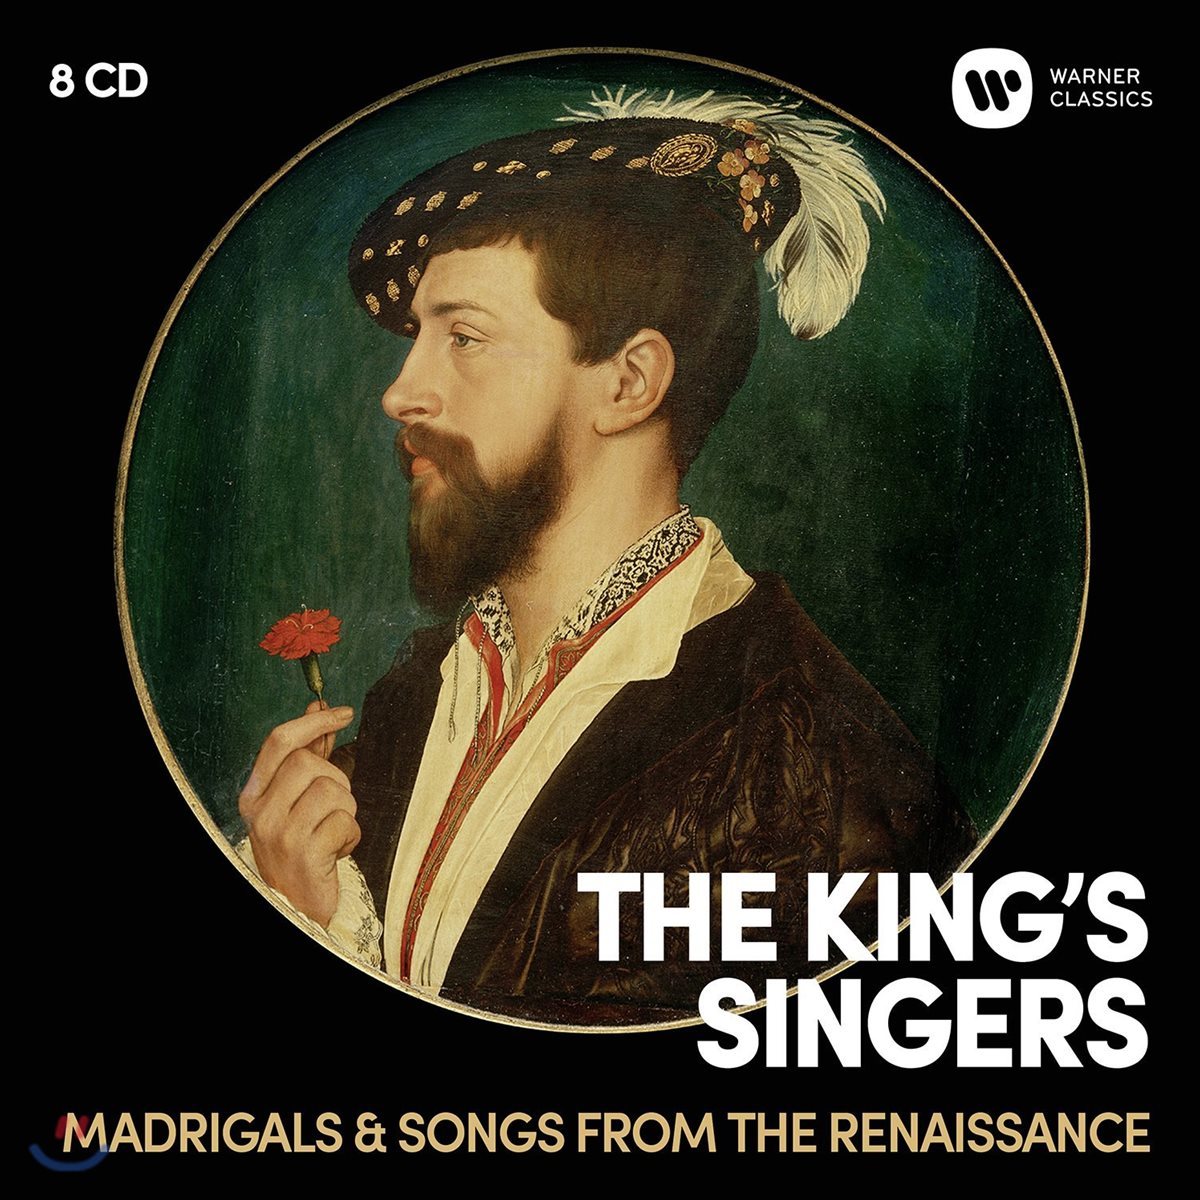 King's Singers 르네상스 마드리갈과 가곡 (Madrigals & Songs from the Renaissance)